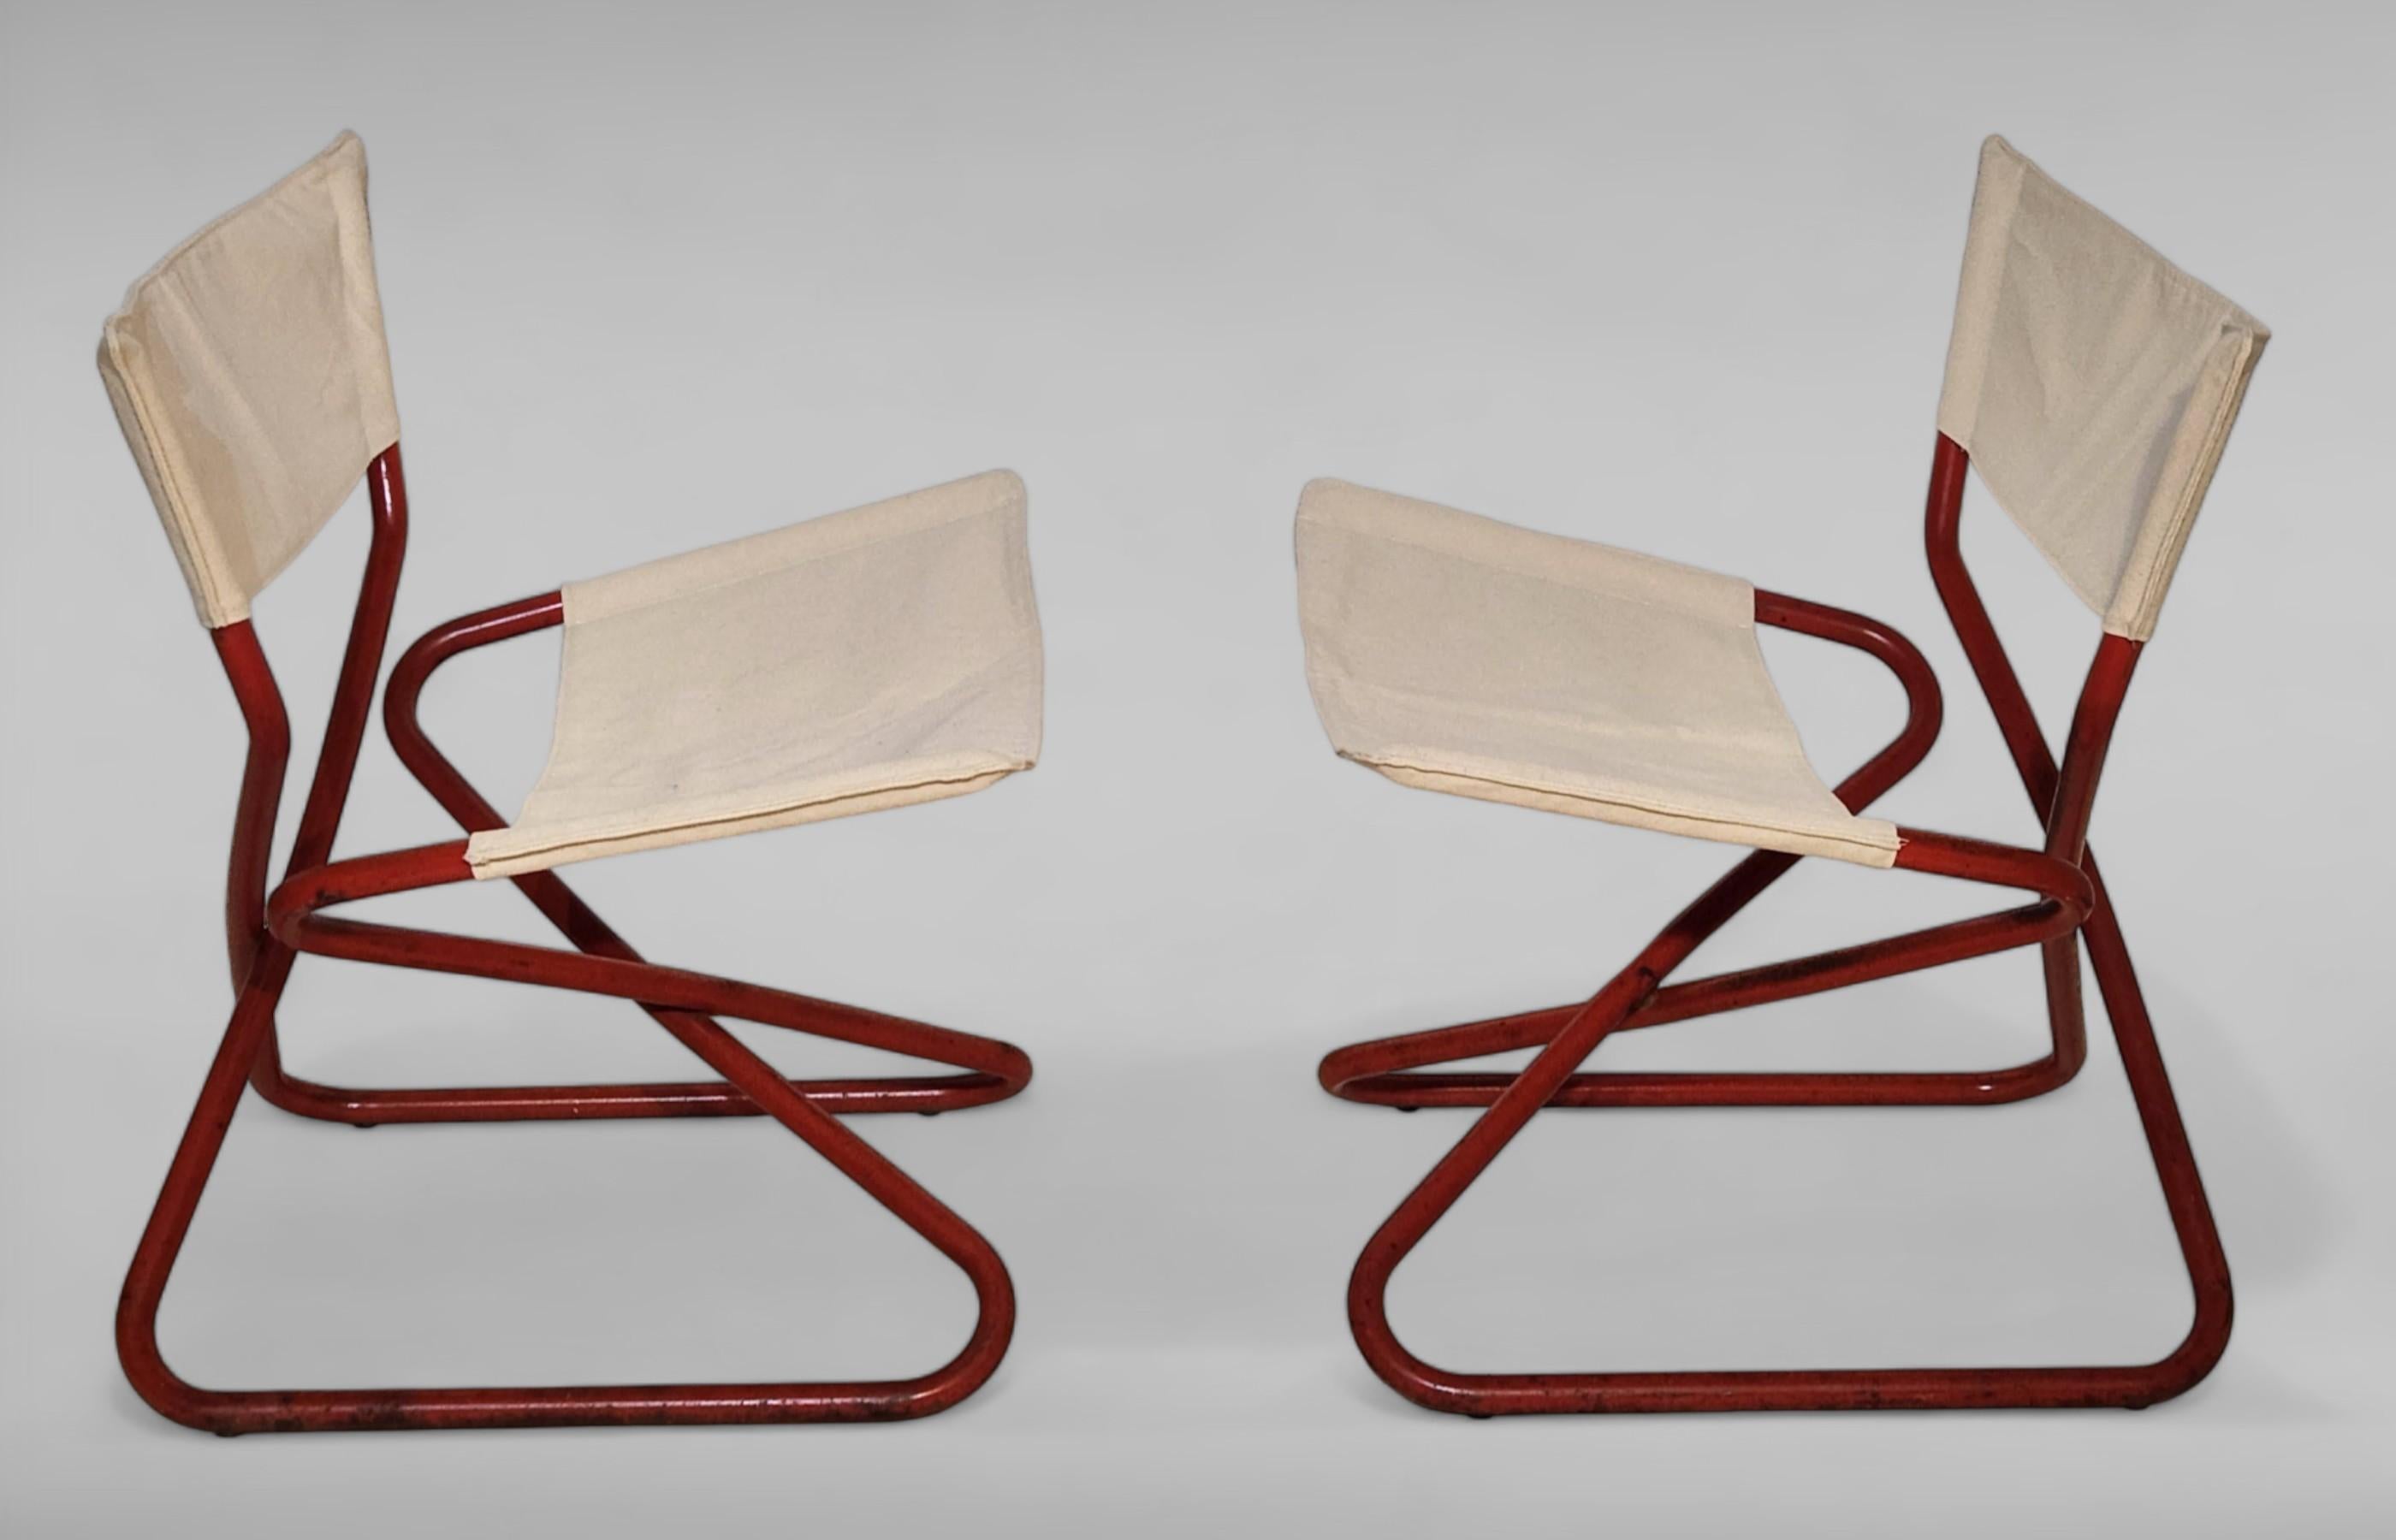 Rare pair of Z easy chairs designed by Erik Magnussen. Produced by Torben Ørskov in Denmark c. 1968 folding chairs.
Original paint and canvas slip on upholsteries. 
Price is for the pair.
Shipping the pair to Europe via FedEx Economy Feight air 10